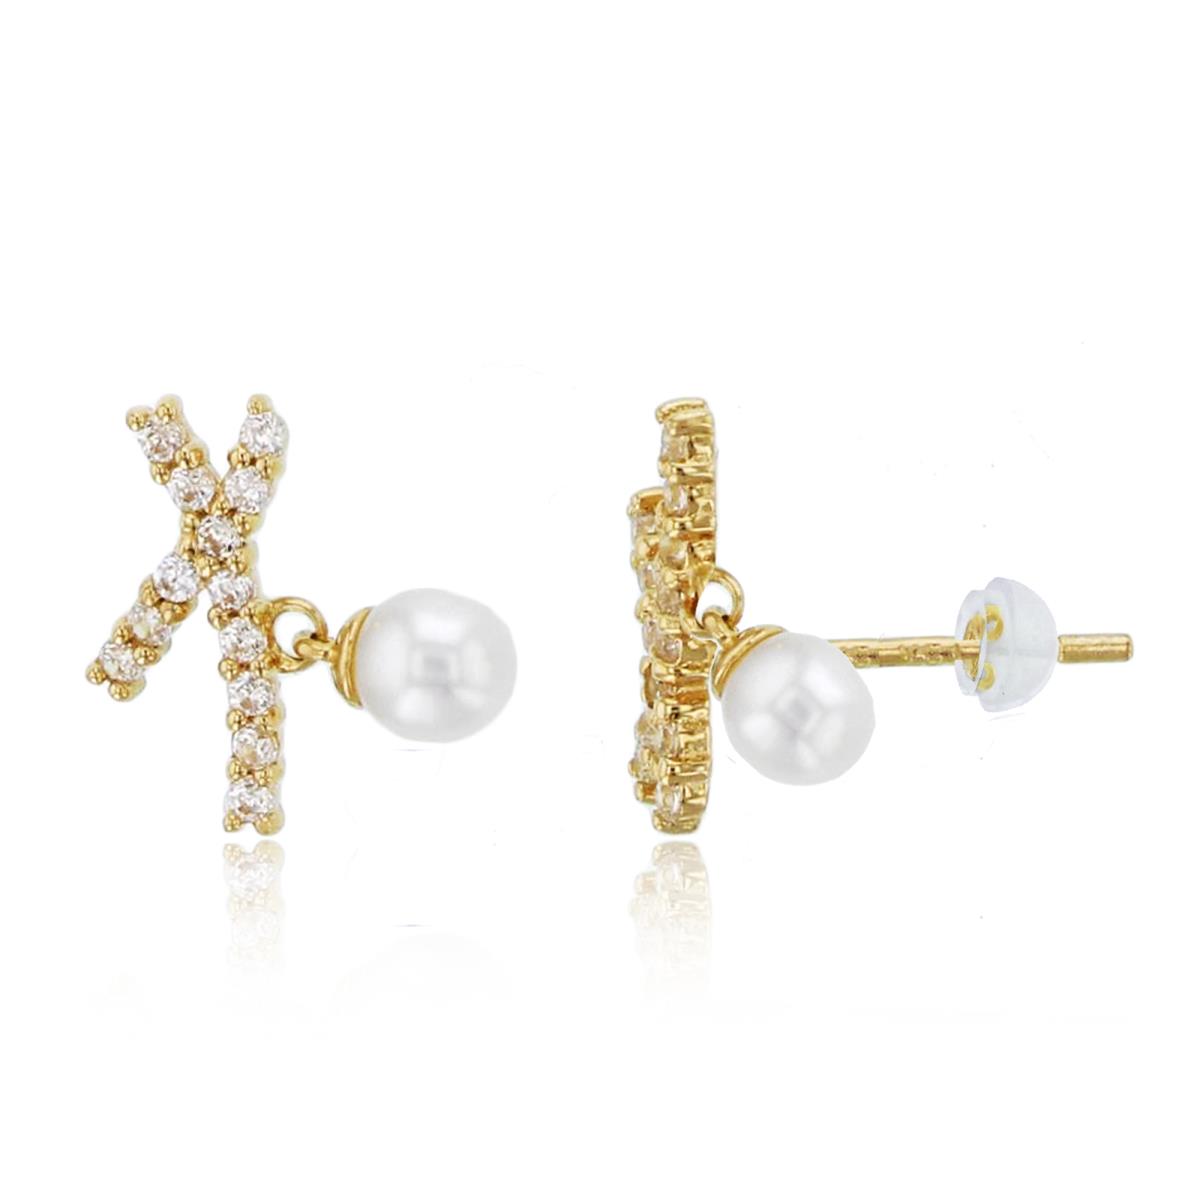 10K Yellow Gold Rnd CZ & Dangling Fresh Water Pearl Criss/Cross Studs with Silicon Backs